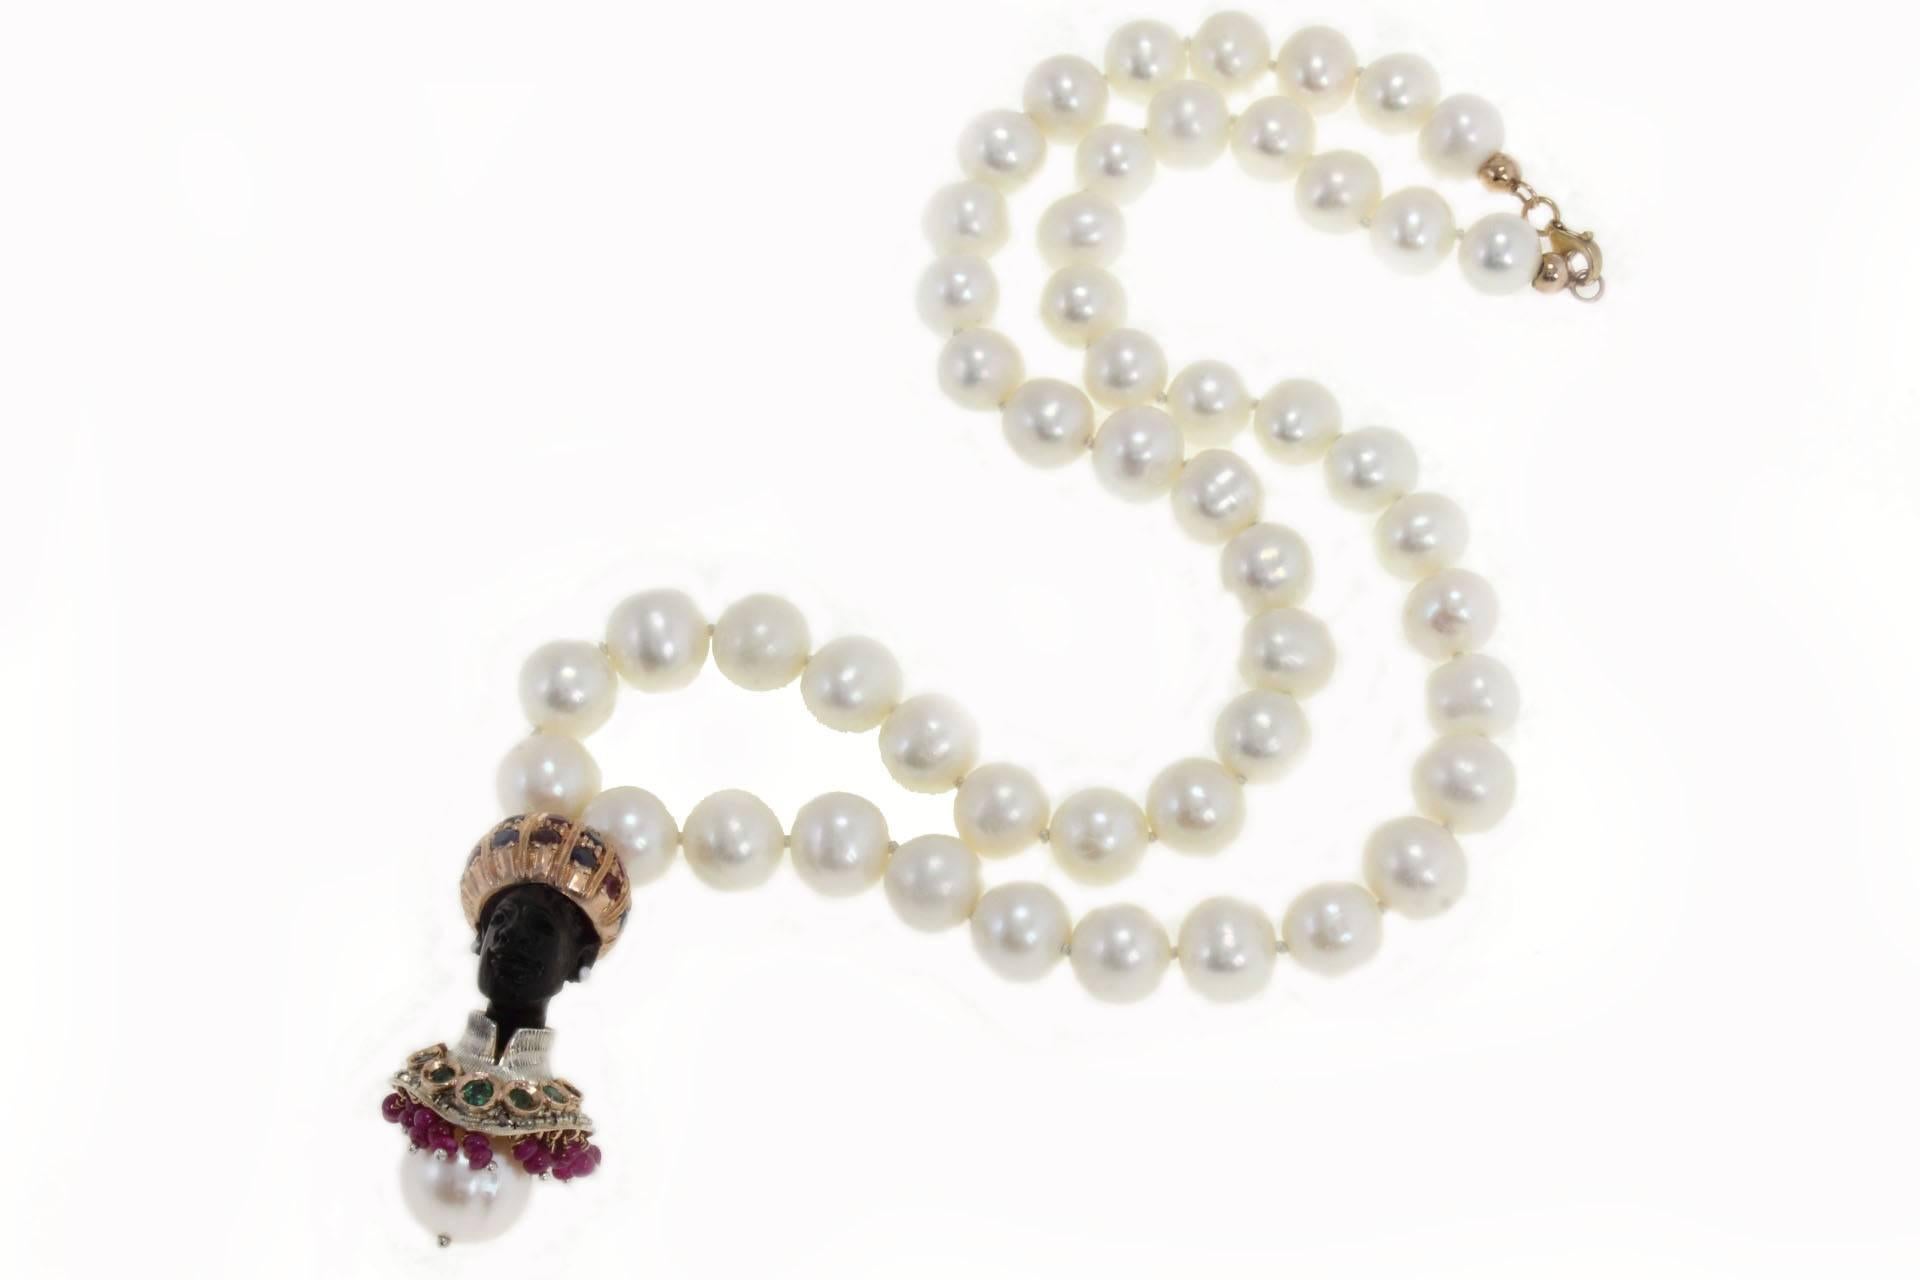 Necklace in 9kt gold composed by a beaded necklace linked with depicting Venetian Moretti Pendant exhibit a meticulous craftsmanship. Moretti pendant is composed of, silver, diamonds, rubies, blue sapphires a pearl and ebony. Instead the necklace is